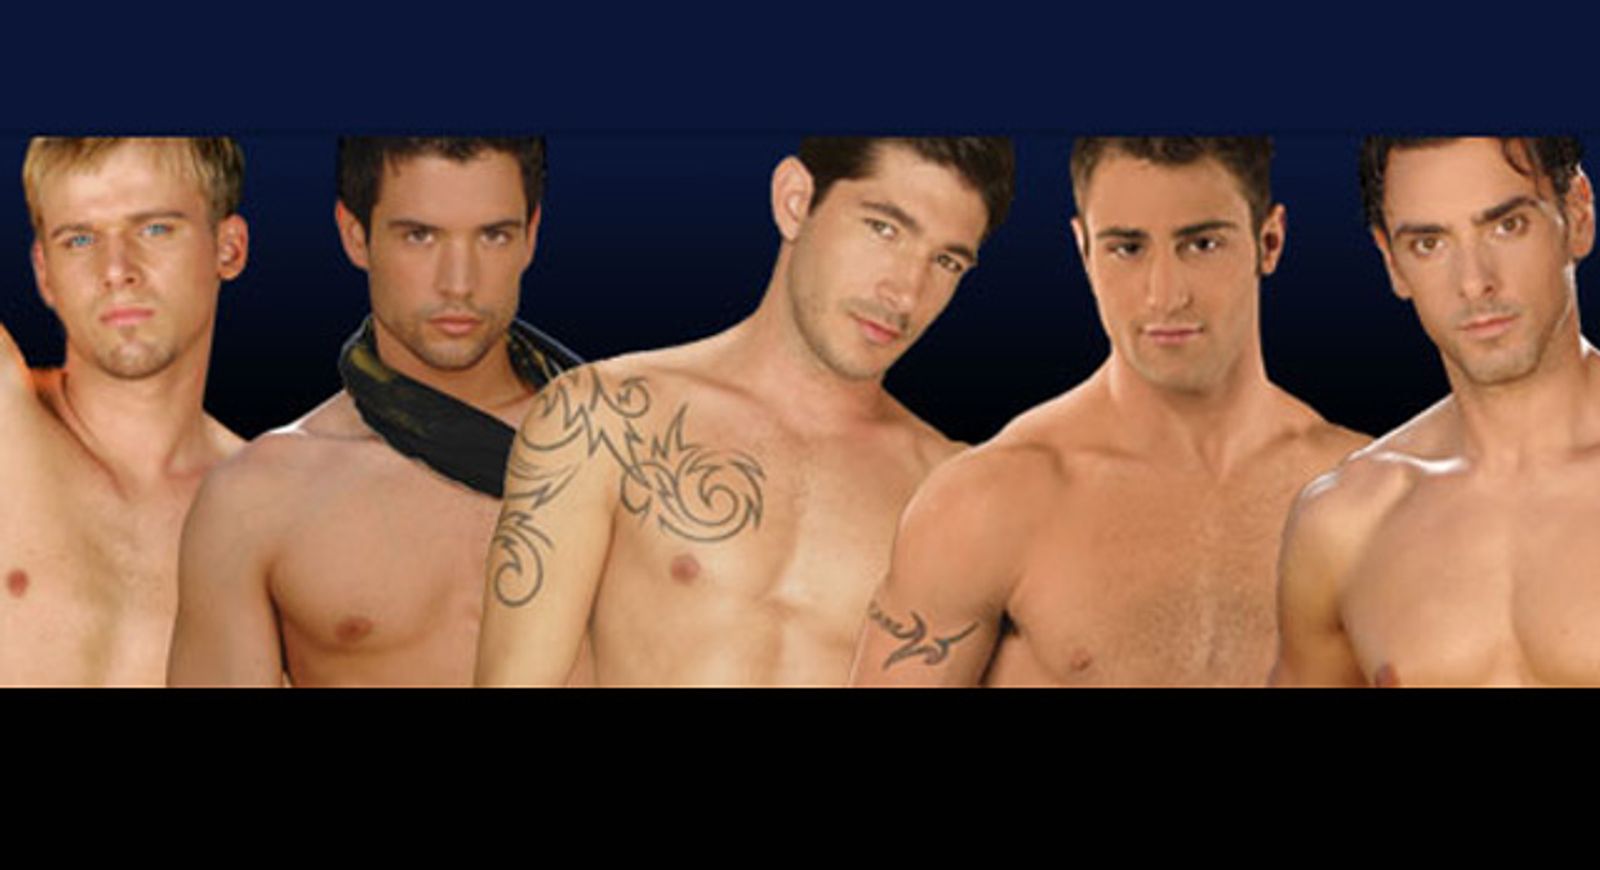 Cybersocket Lists ‘Top 50 Gay Porn Stars’ of 2009